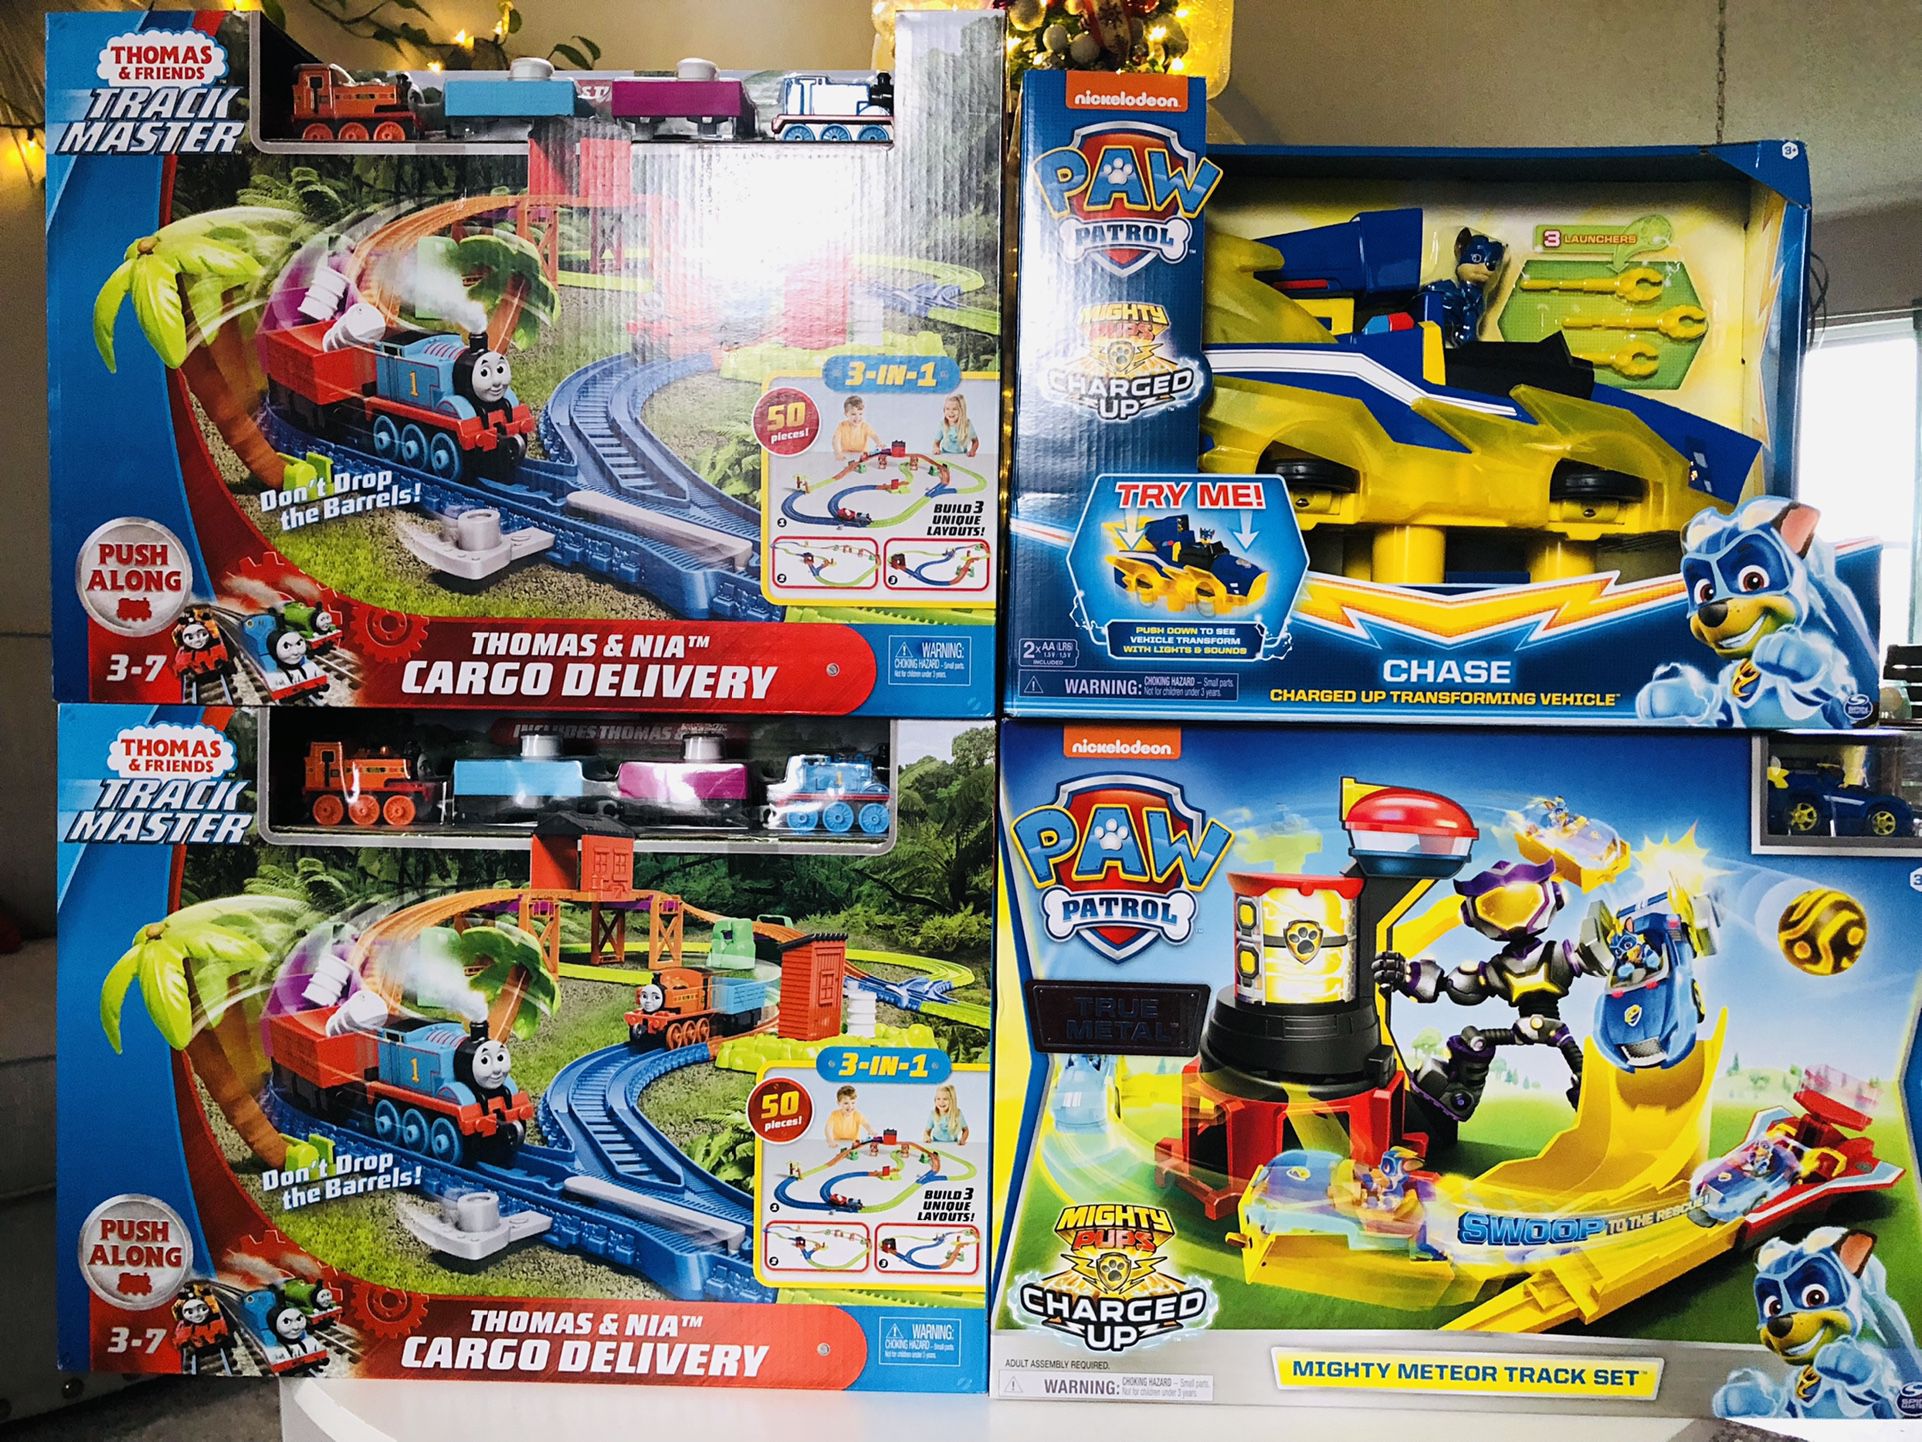 $110 For All 2 Sets Of Thomas  And Friend  Track master  And 2 Sets Of Paw Patrol It’s All Brand New And Pick Up Gahanna